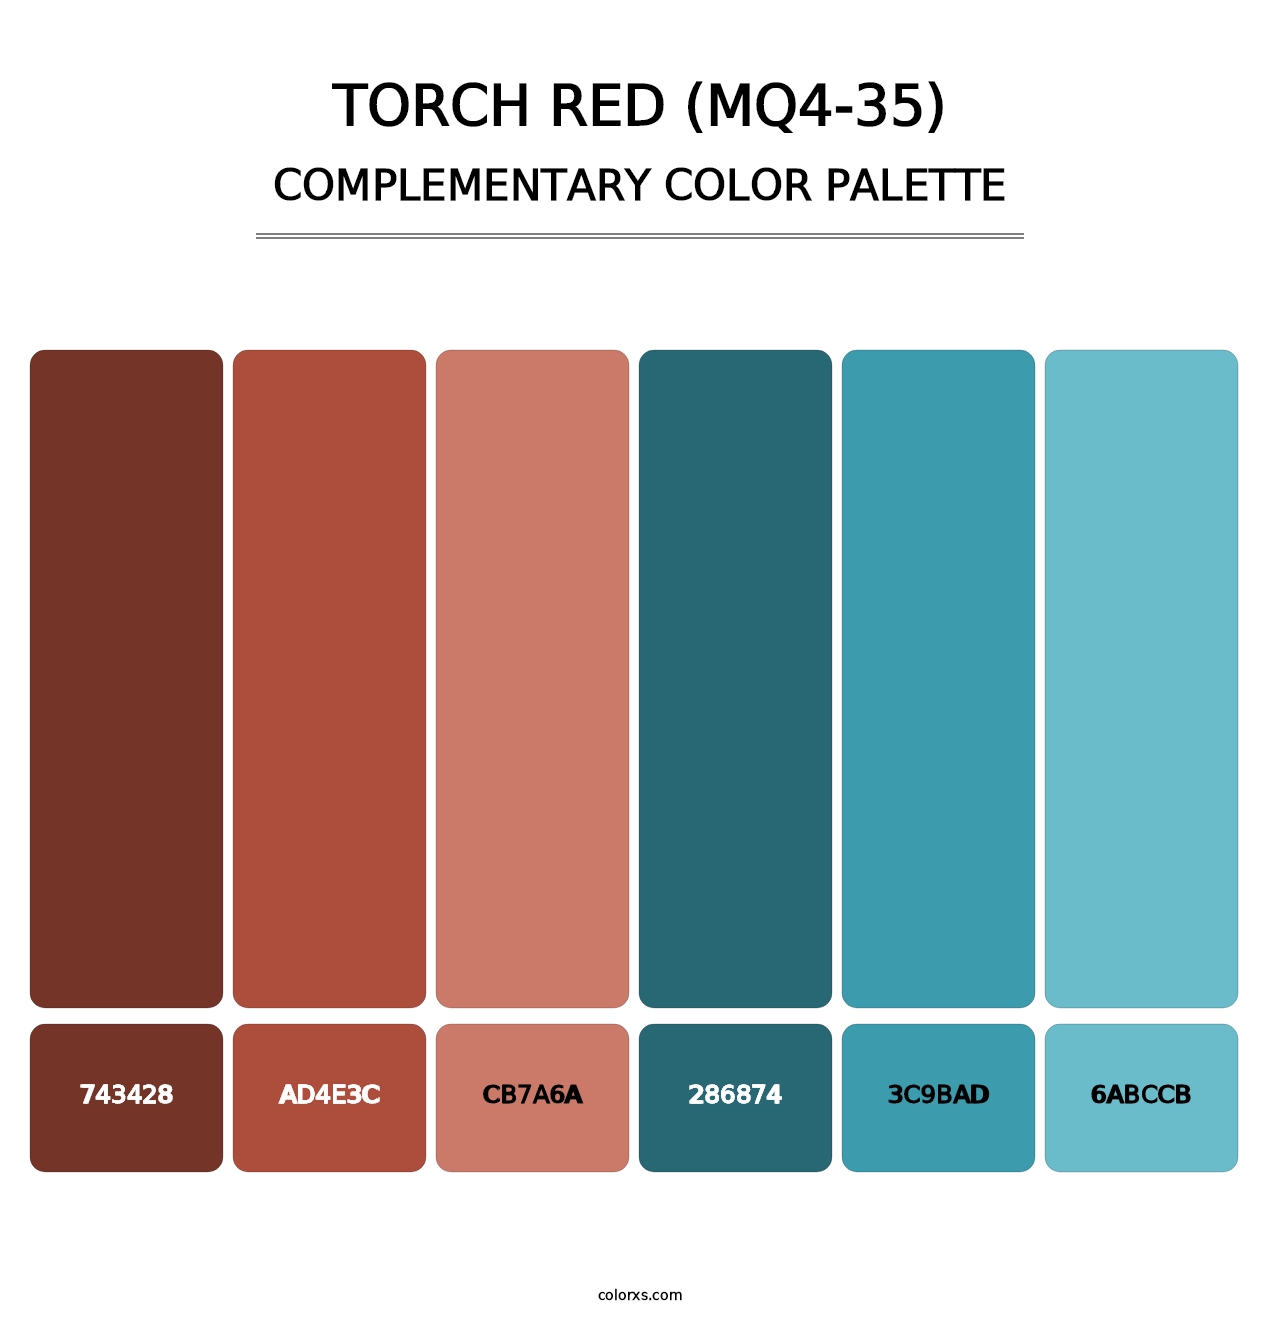 Torch Red (MQ4-35) - Complementary Color Palette